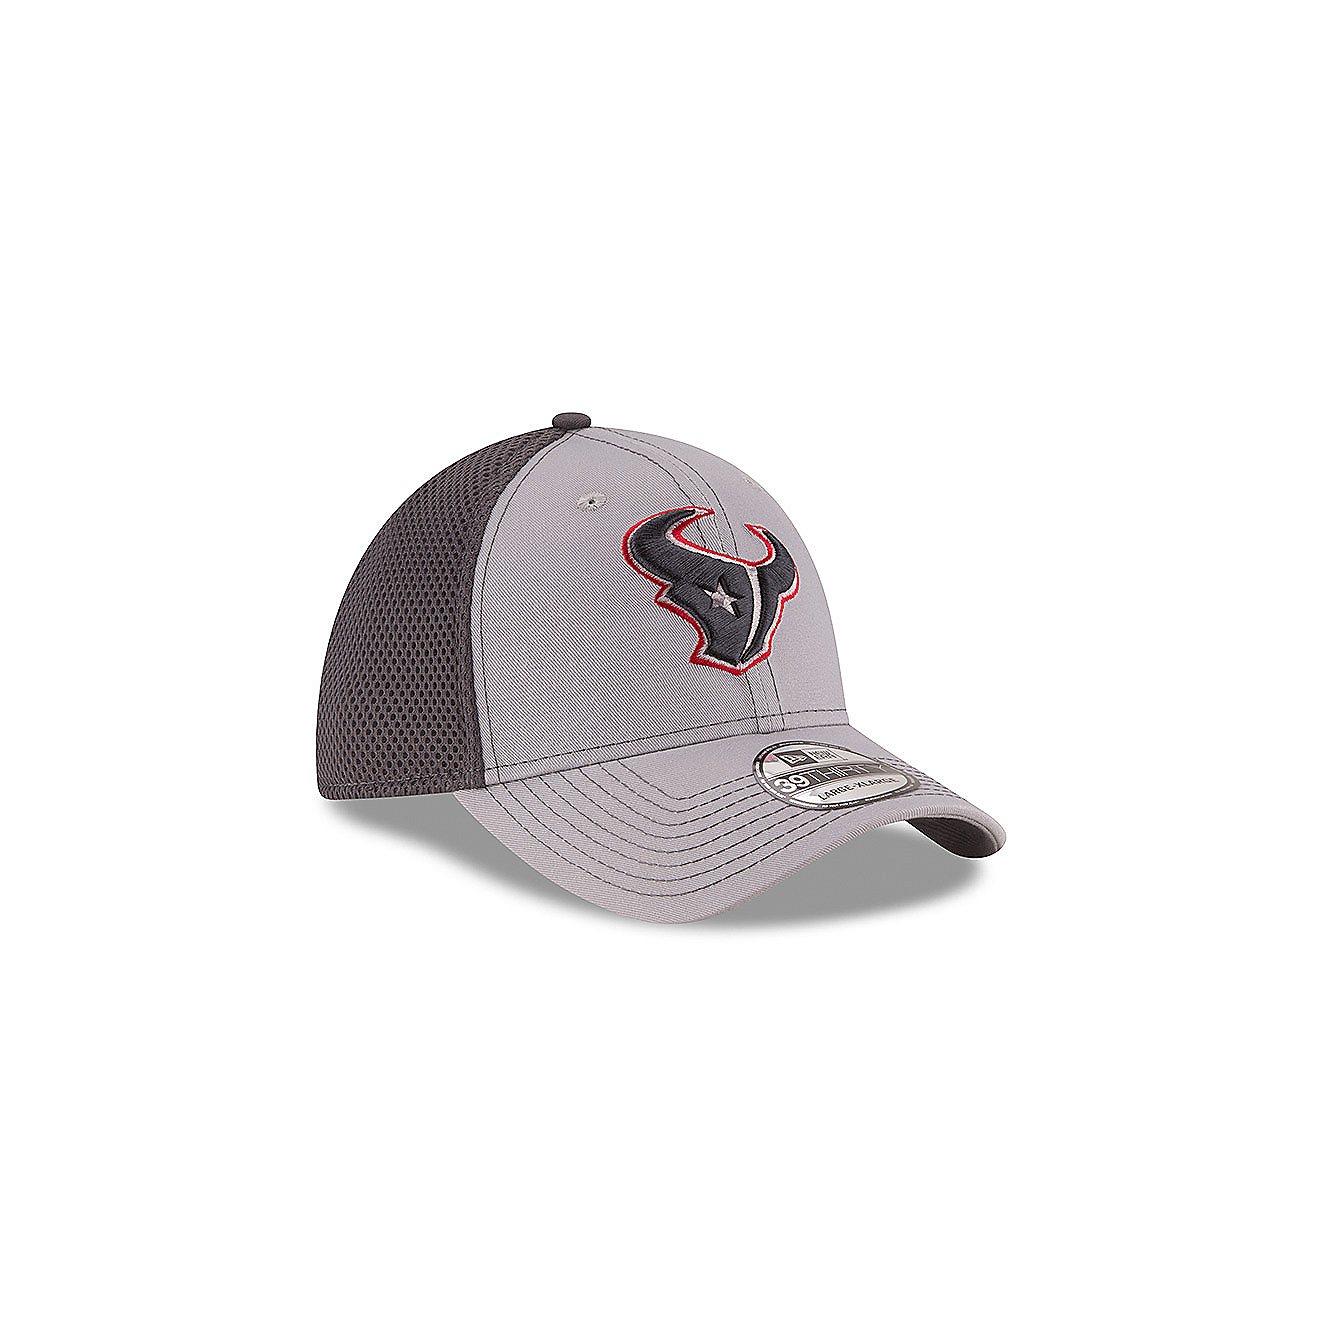 New Era Men's Houston Texans Grayed Out 39THIRTY Neo Cap                                                                         - view number 3